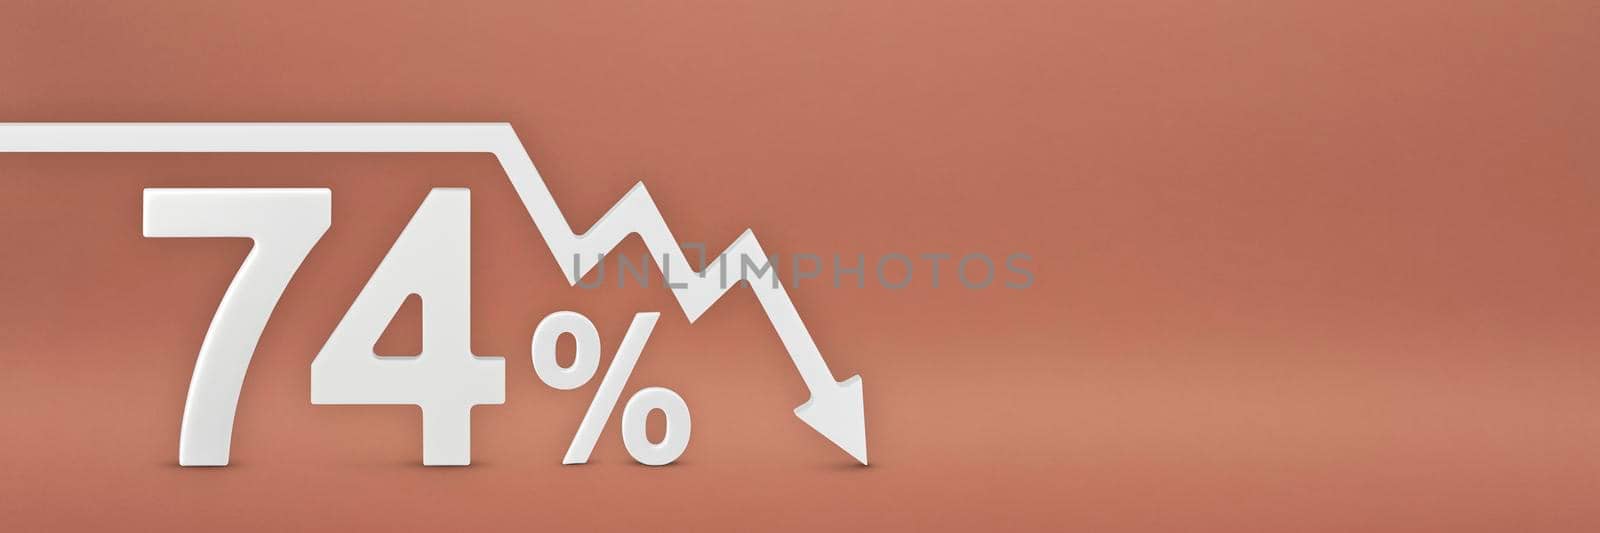 seventy-four percent, the arrow on the graph is pointing down. Stock market crash, bear market, inflation.Economic collapse, collapse of stocks.3d banner,74 percent discount sign on a red background